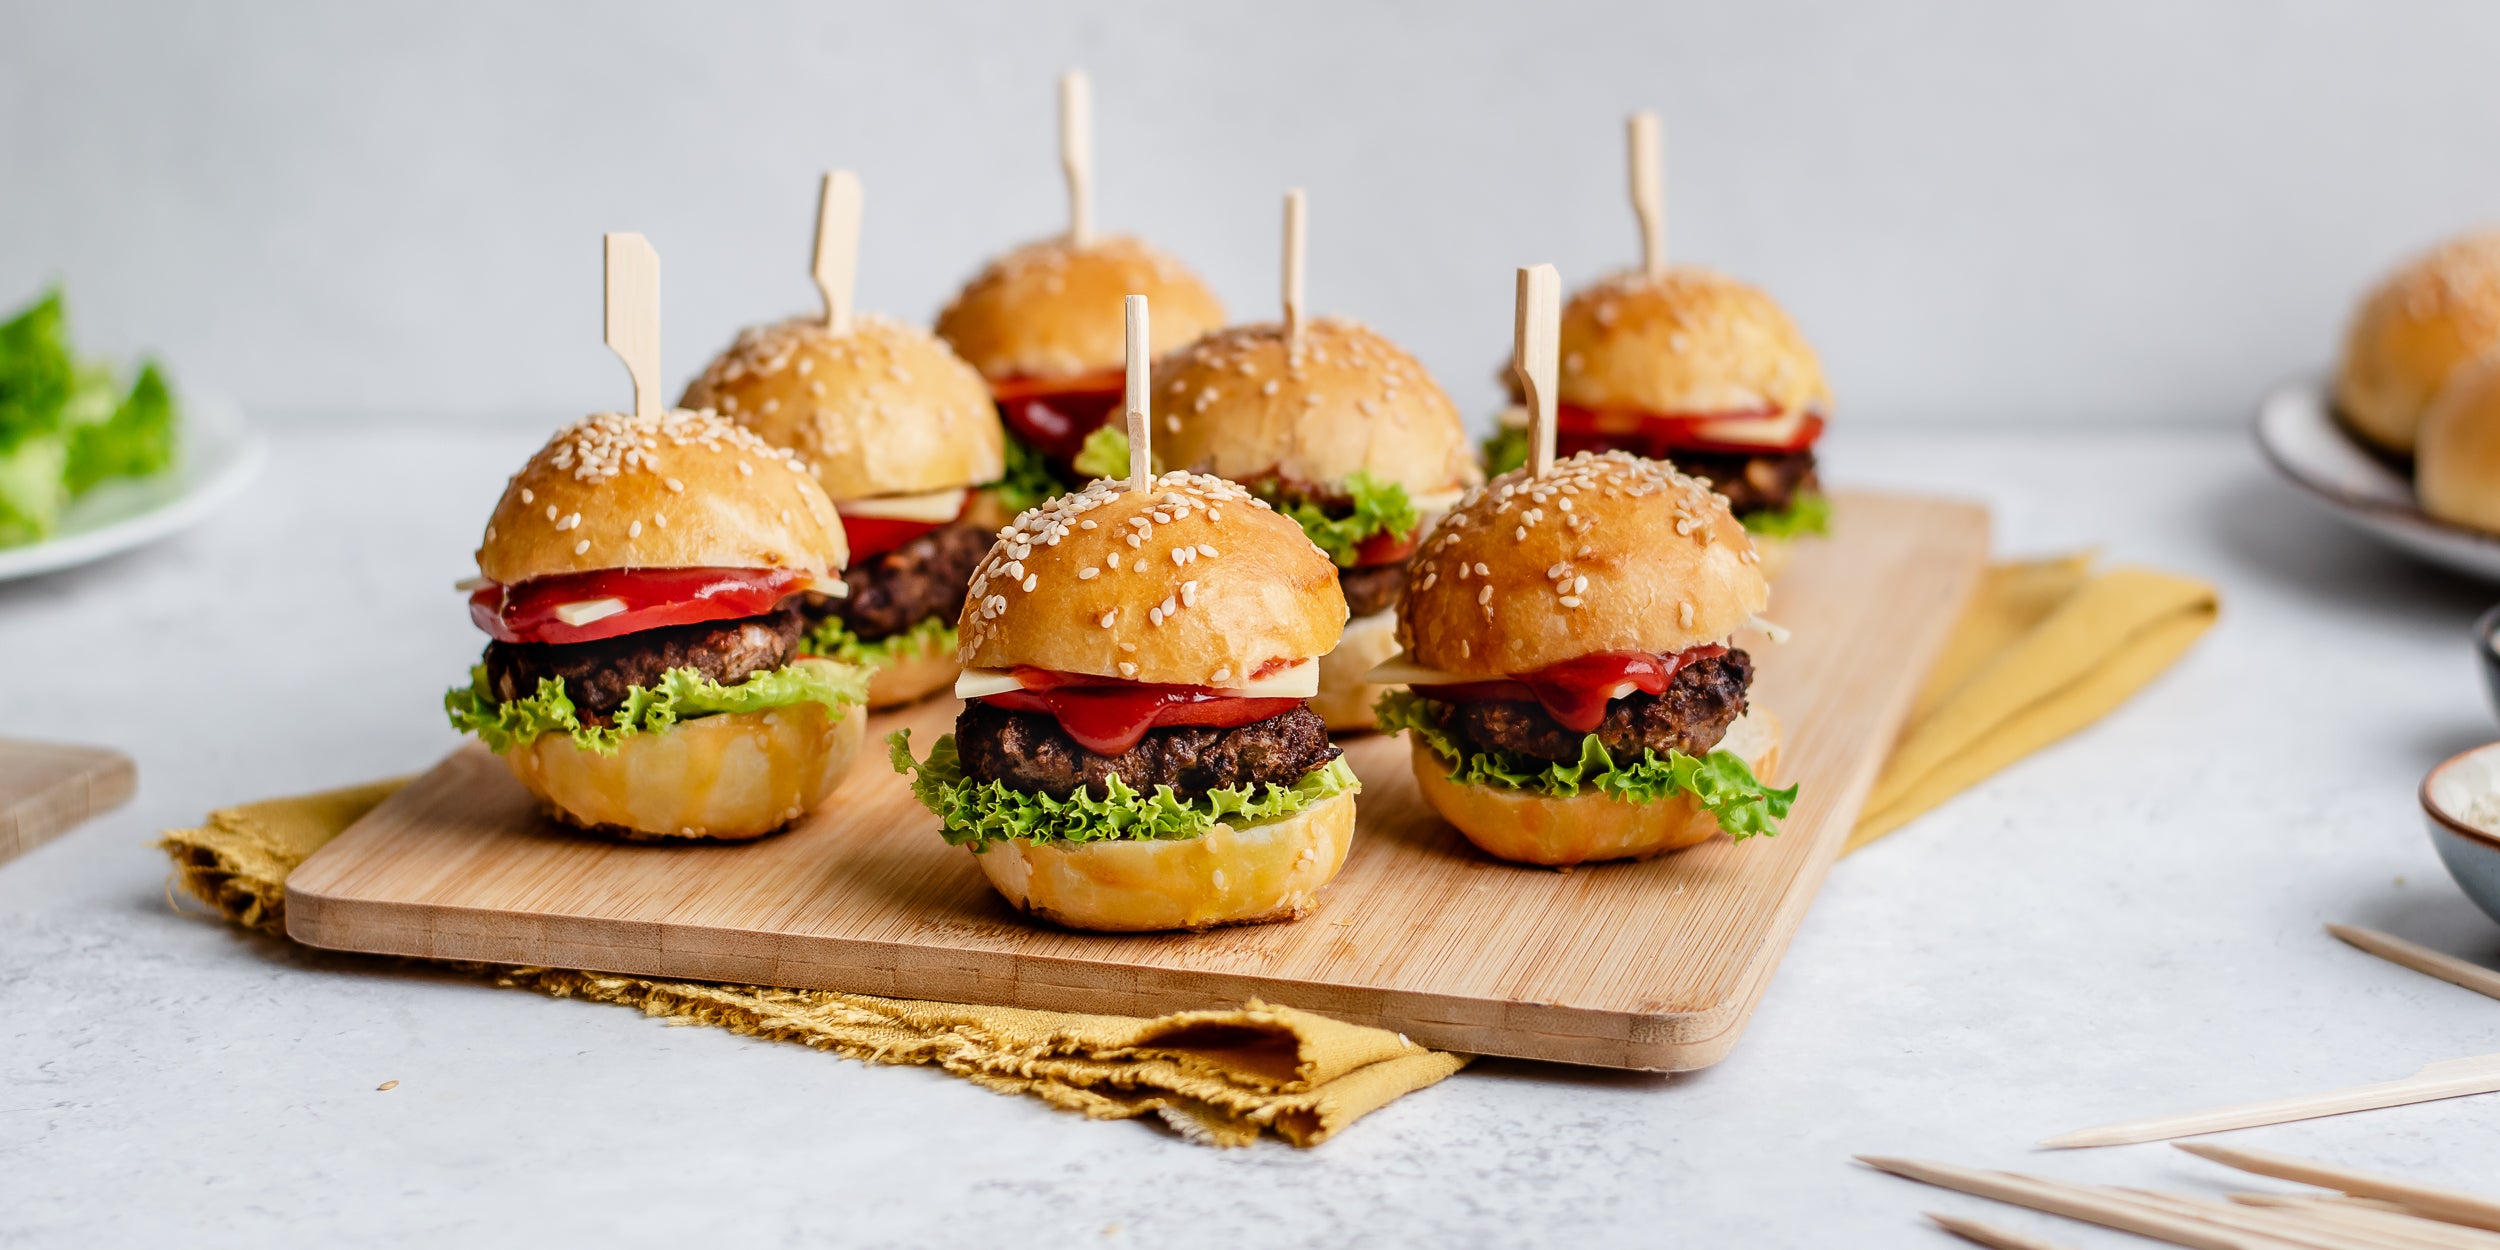 7 burgers lined up on wooden chopping board with skewers in the centre